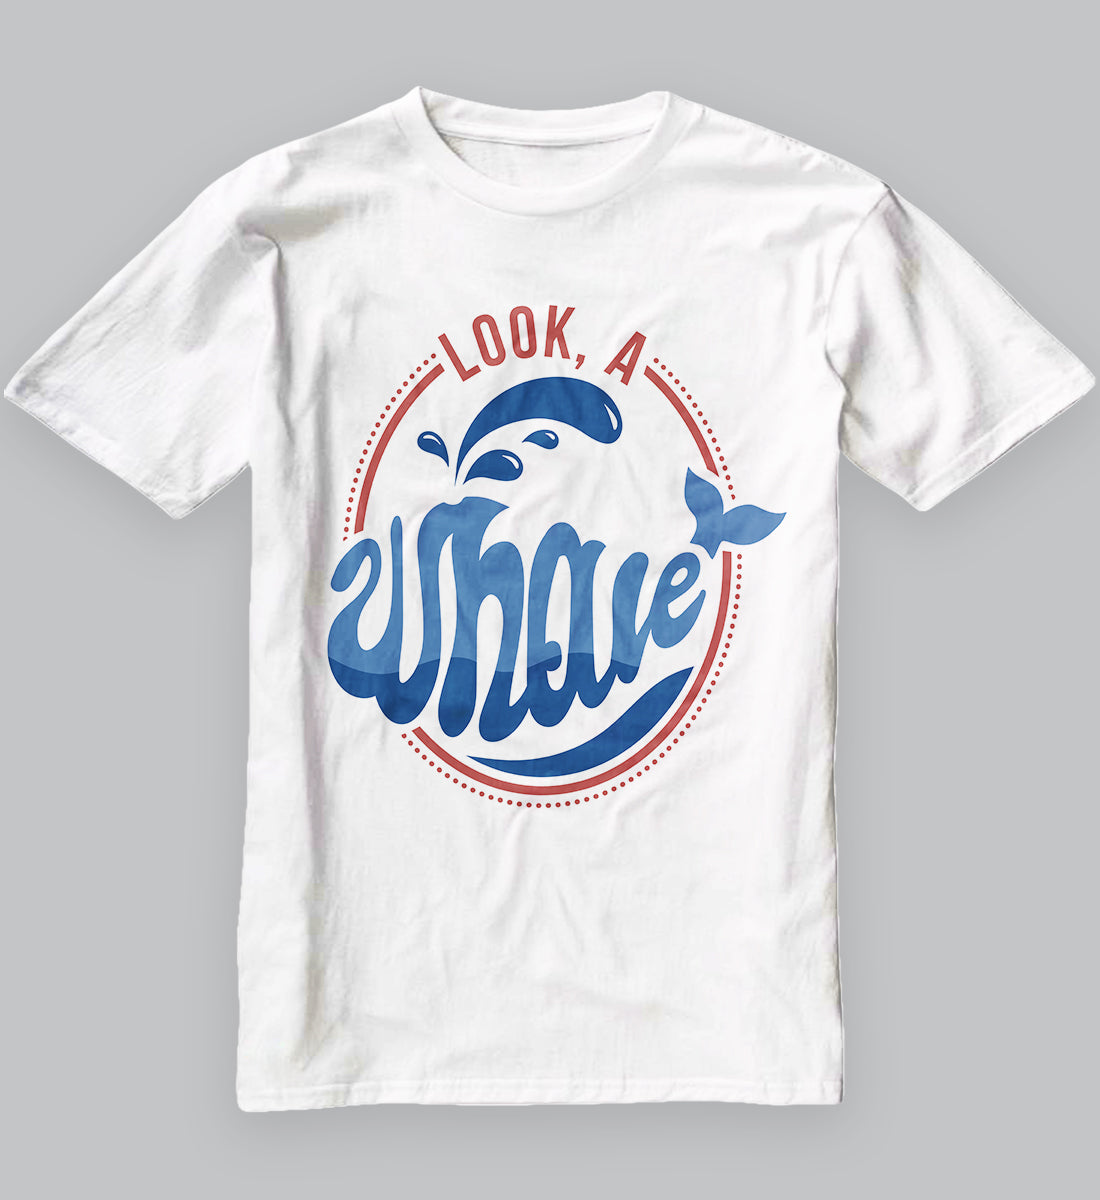 Look, a Whale T-Shirt